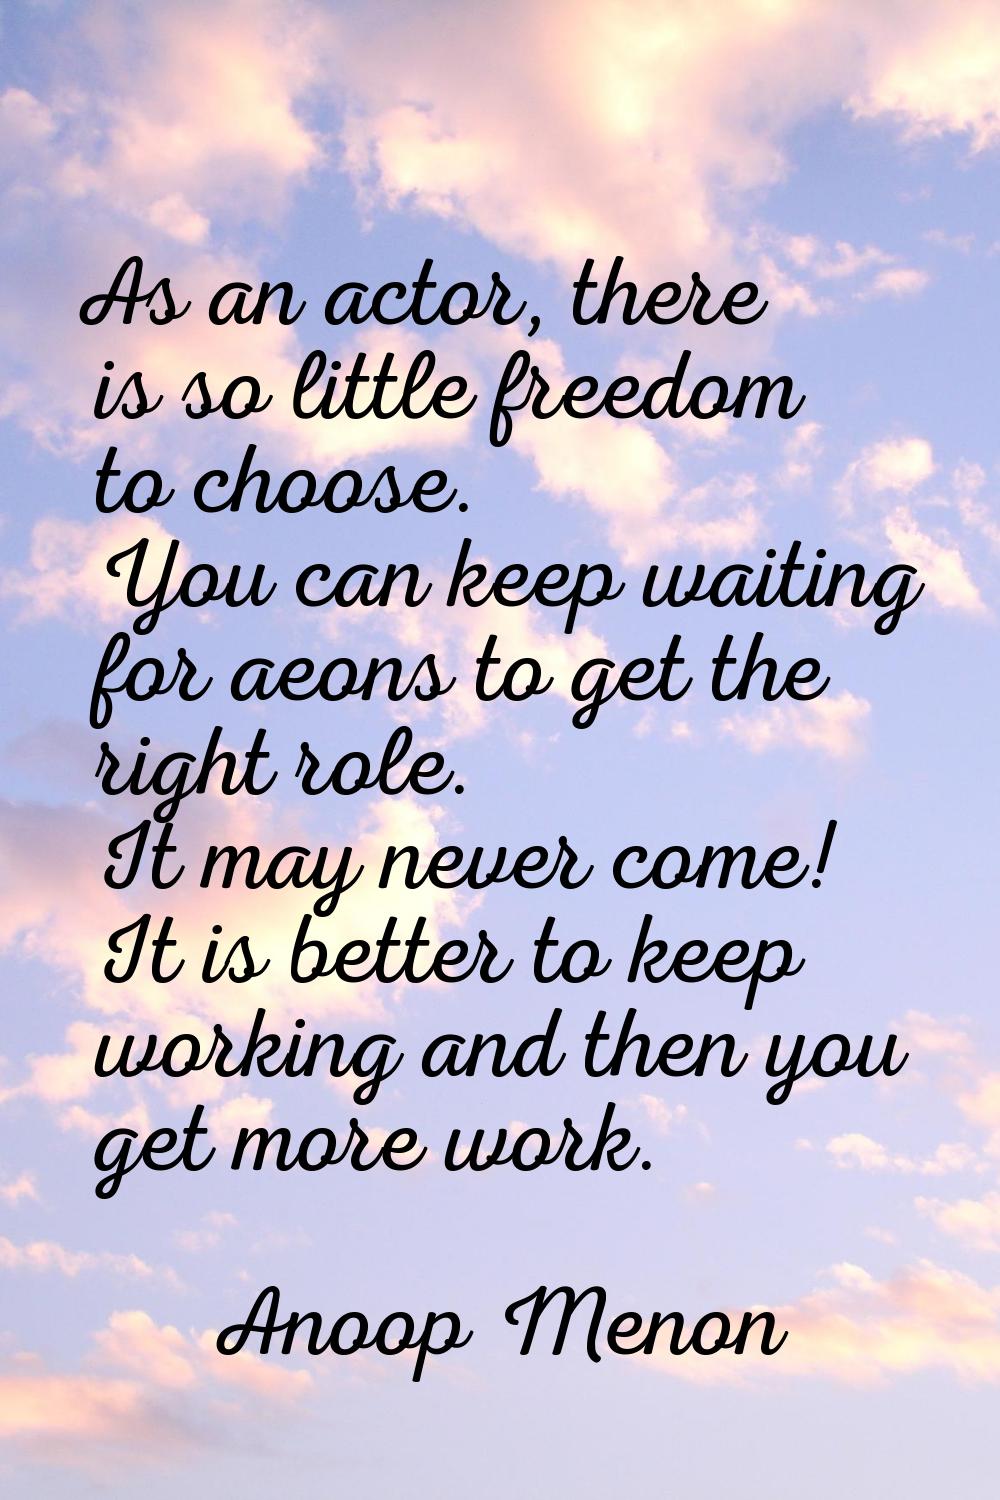 As an actor, there is so little freedom to choose. You can keep waiting for aeons to get the right 